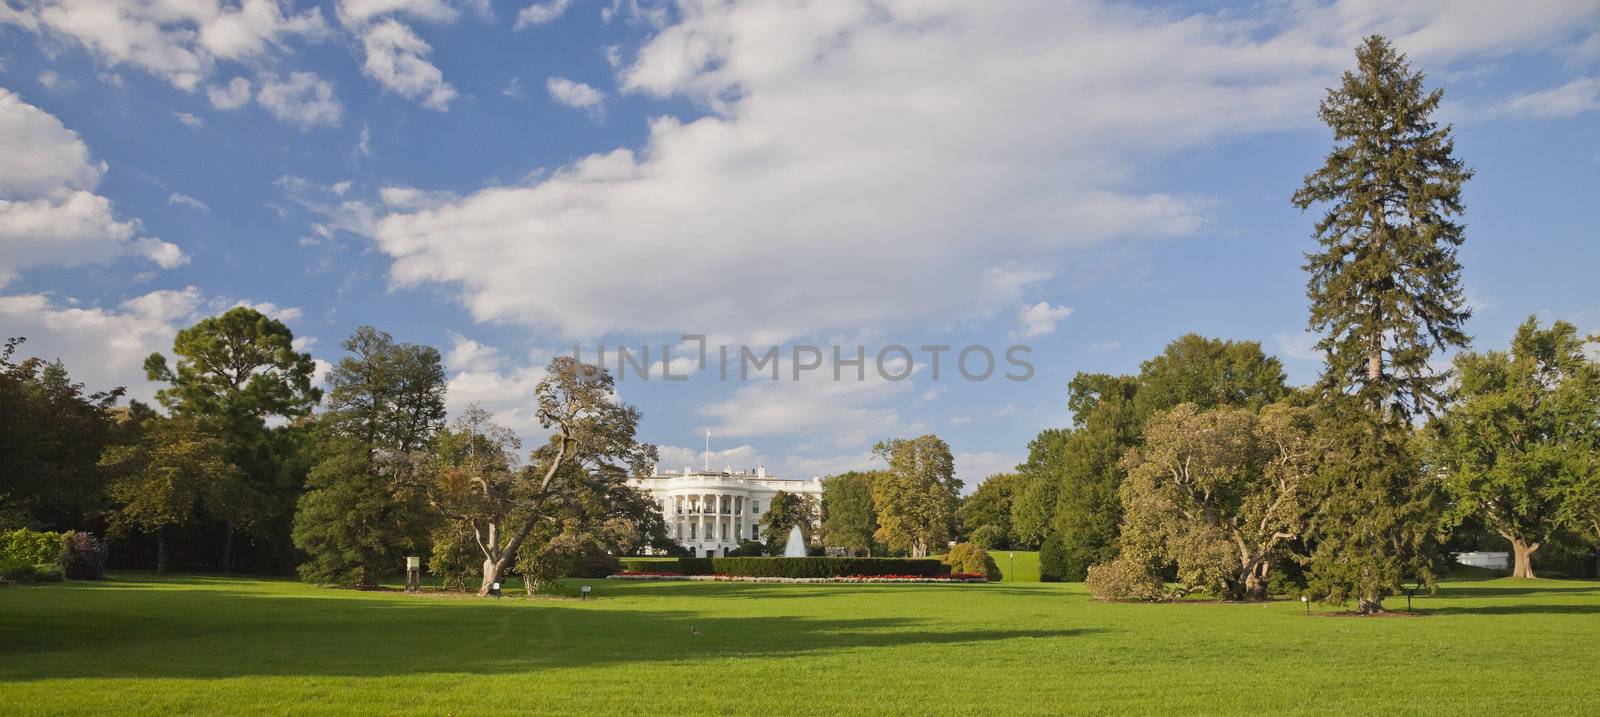 The White House in Washington D.C., the South Gate